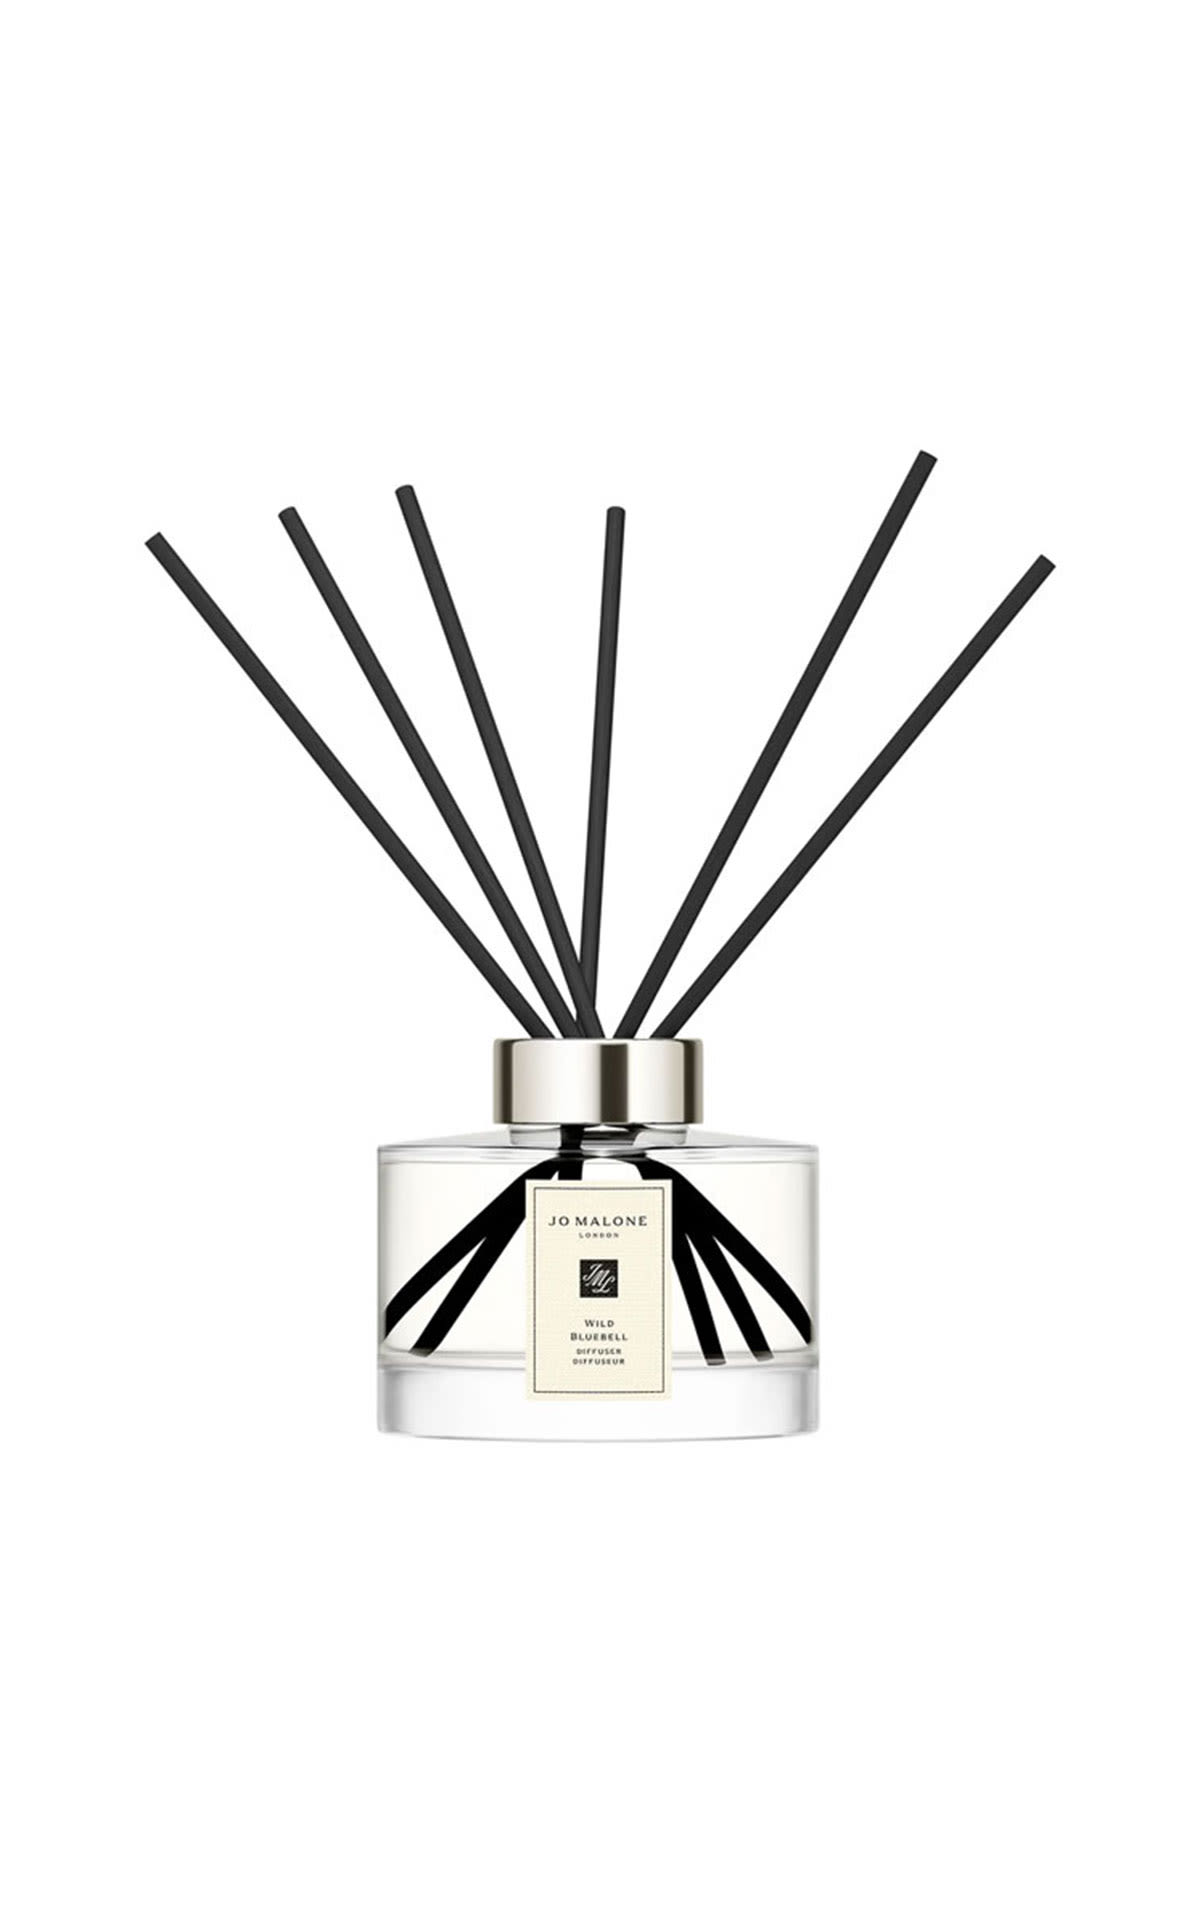 The Cosmetics Company Store Jo Malone Wild bluebell diffuser from Bicester Village